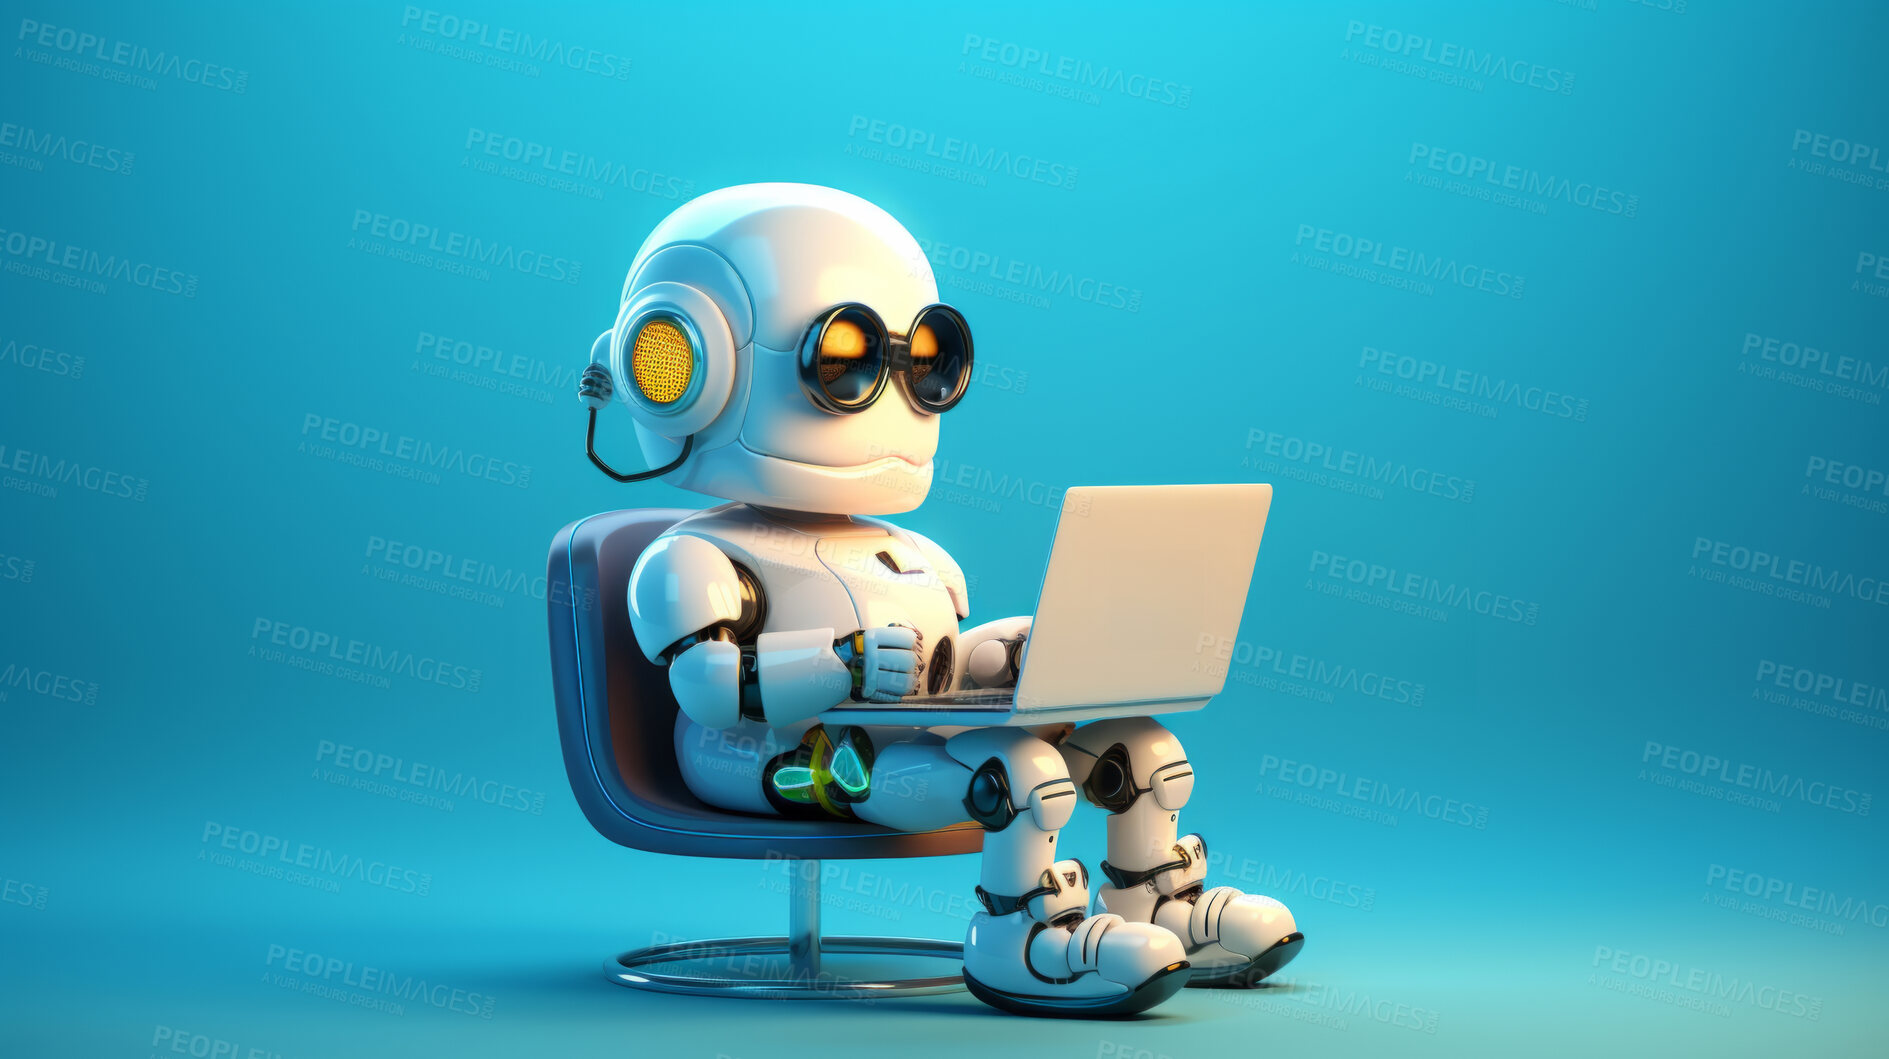 Buy stock photo Cute artificial intelligence robot chatbot with laptop. Robot chatting or working